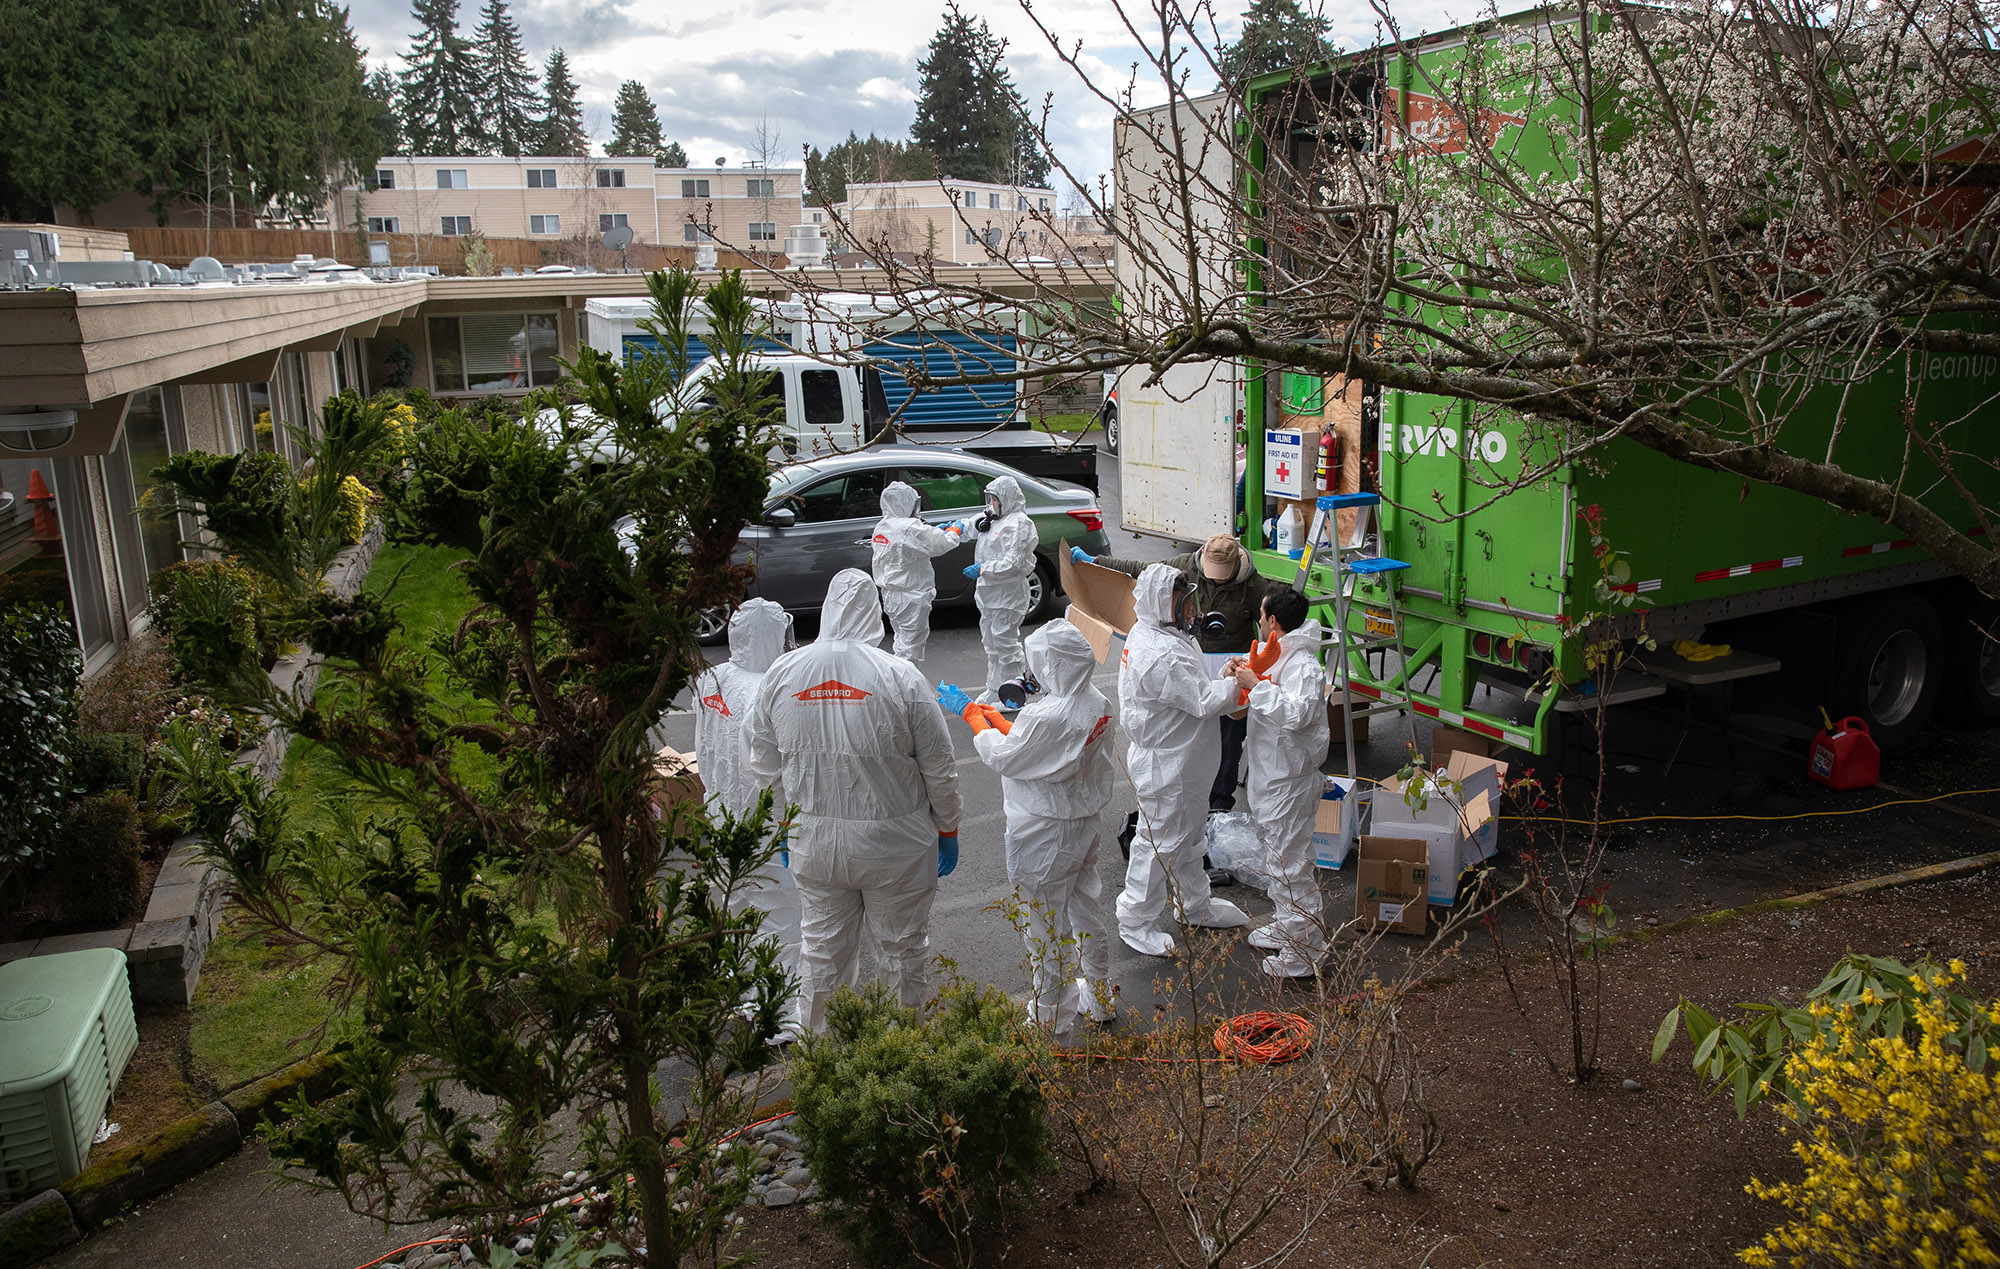 A cleaning crew prepares to enter the Life Care Center in Kirkland, Washington on March 12.